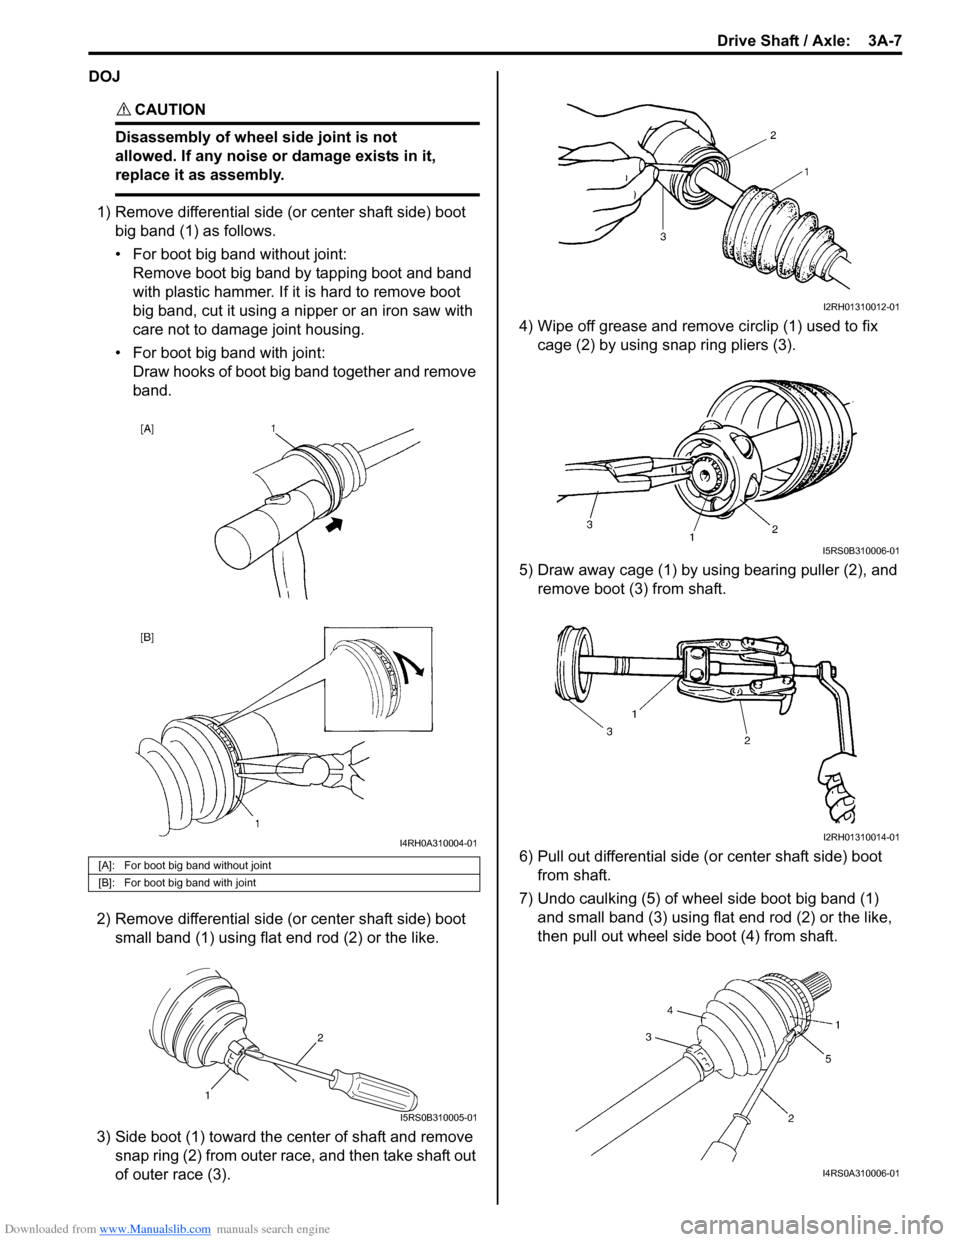 SUZUKI SWIFT 2006 2.G Service Owners Guide Downloaded from www.Manualslib.com manuals search engine Drive Shaft / Axle:  3A-7
DOJ
CAUTION! 
Disassembly of wheel side joint is not 
allowed. If any noise or damage exists in it, 
replace it as as